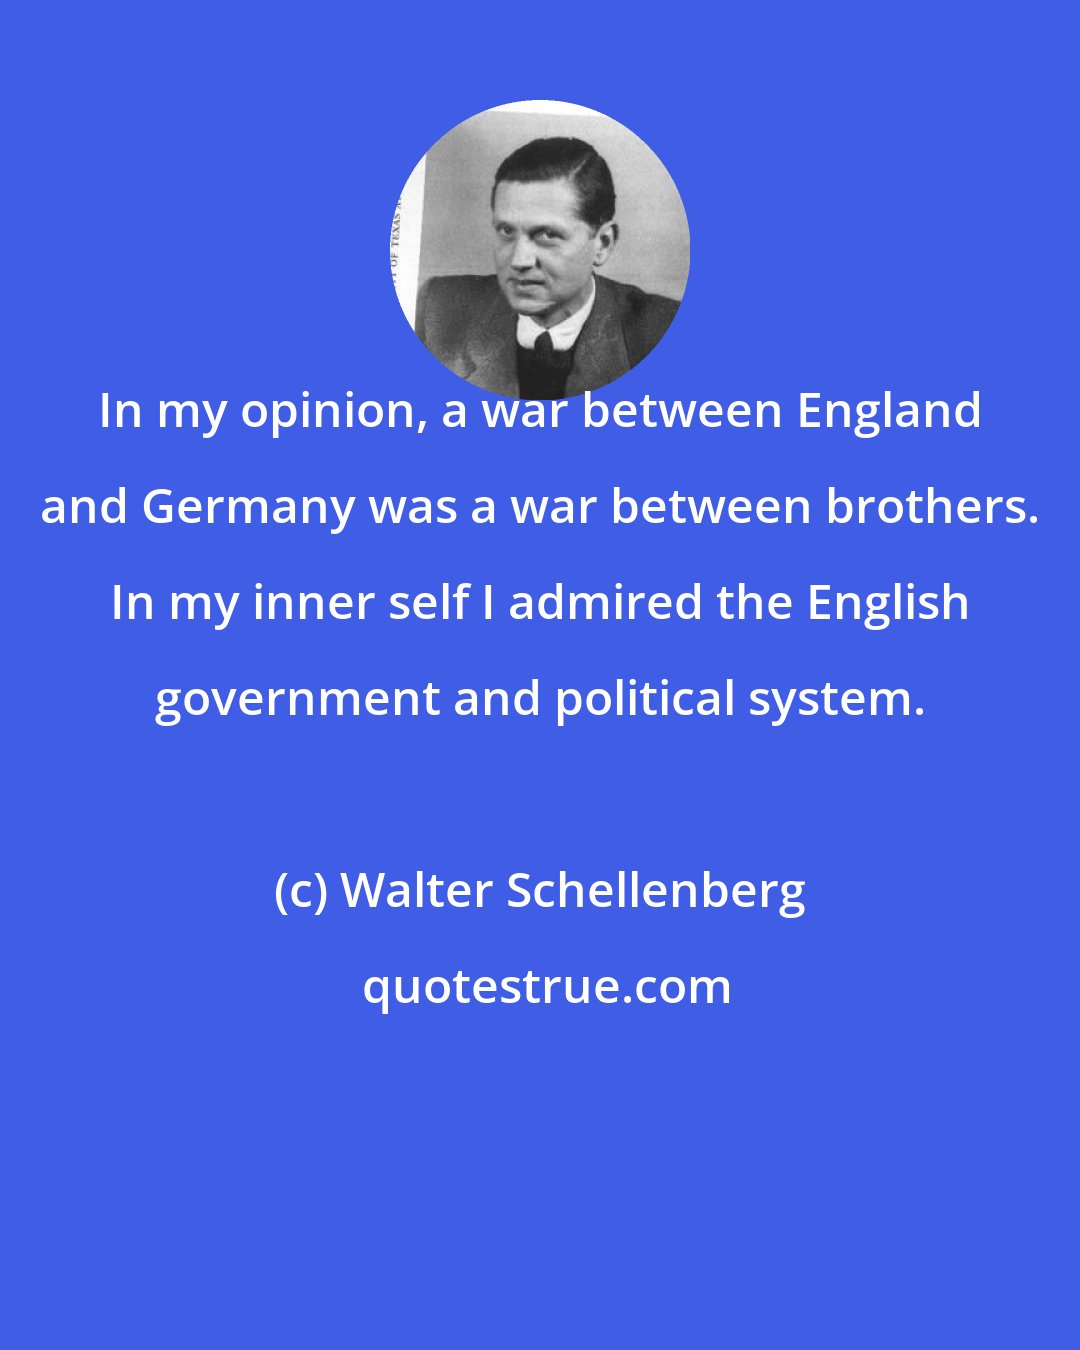 Walter Schellenberg: In my opinion, a war between England and Germany was a war between brothers. In my inner self I admired the English government and political system.